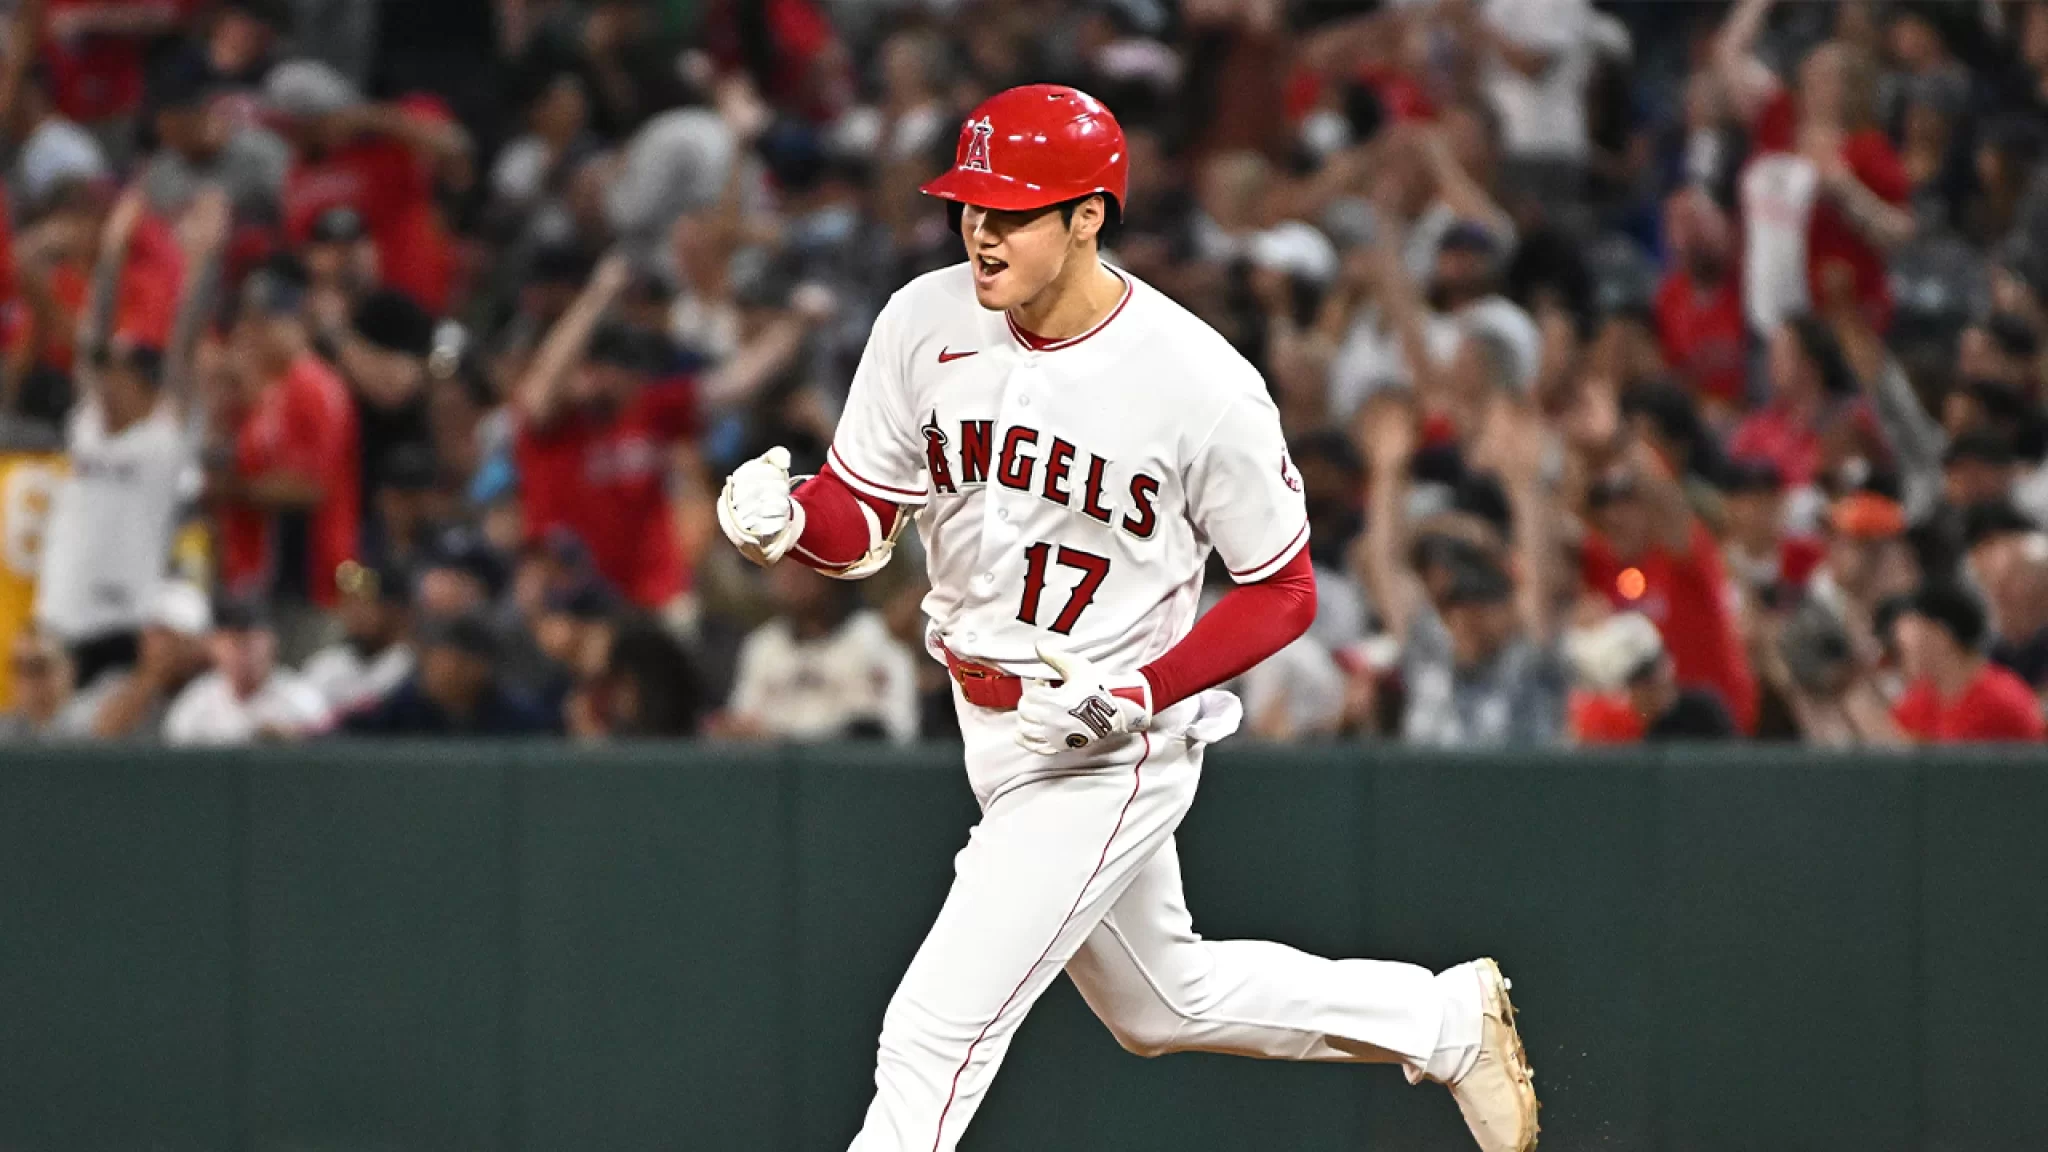 Angels snap 14-game losing streak thanks to Shohei Ohtani’s two-run homer